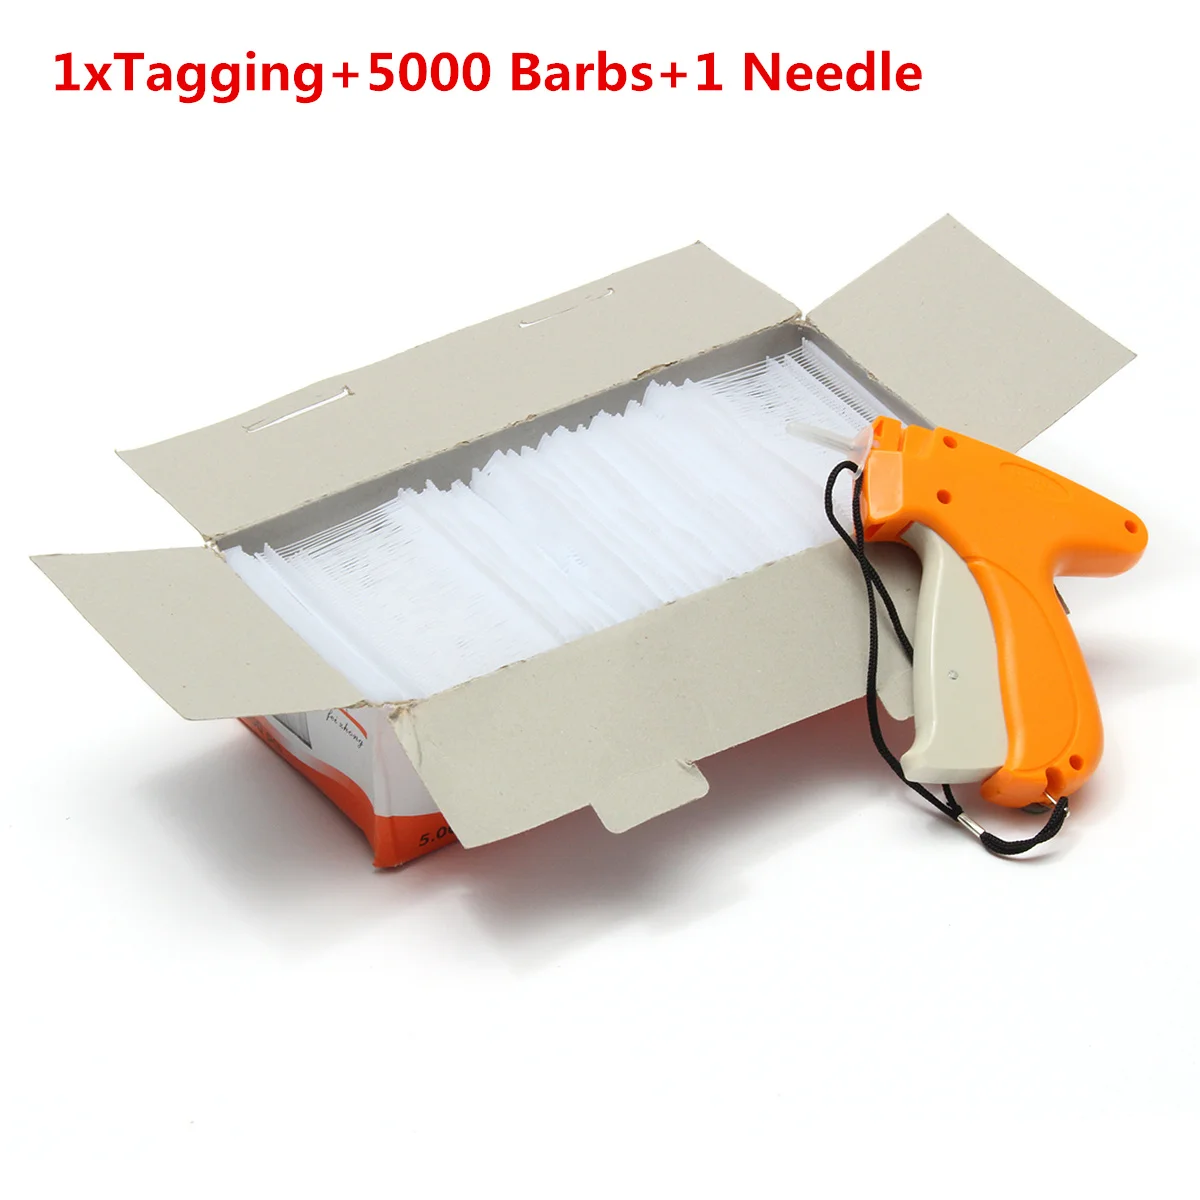 Clothing Garment Price Brand Label Tag Tagging Gun Kit Set with 5000pcs 25mm Barbs Needle clothes tagging